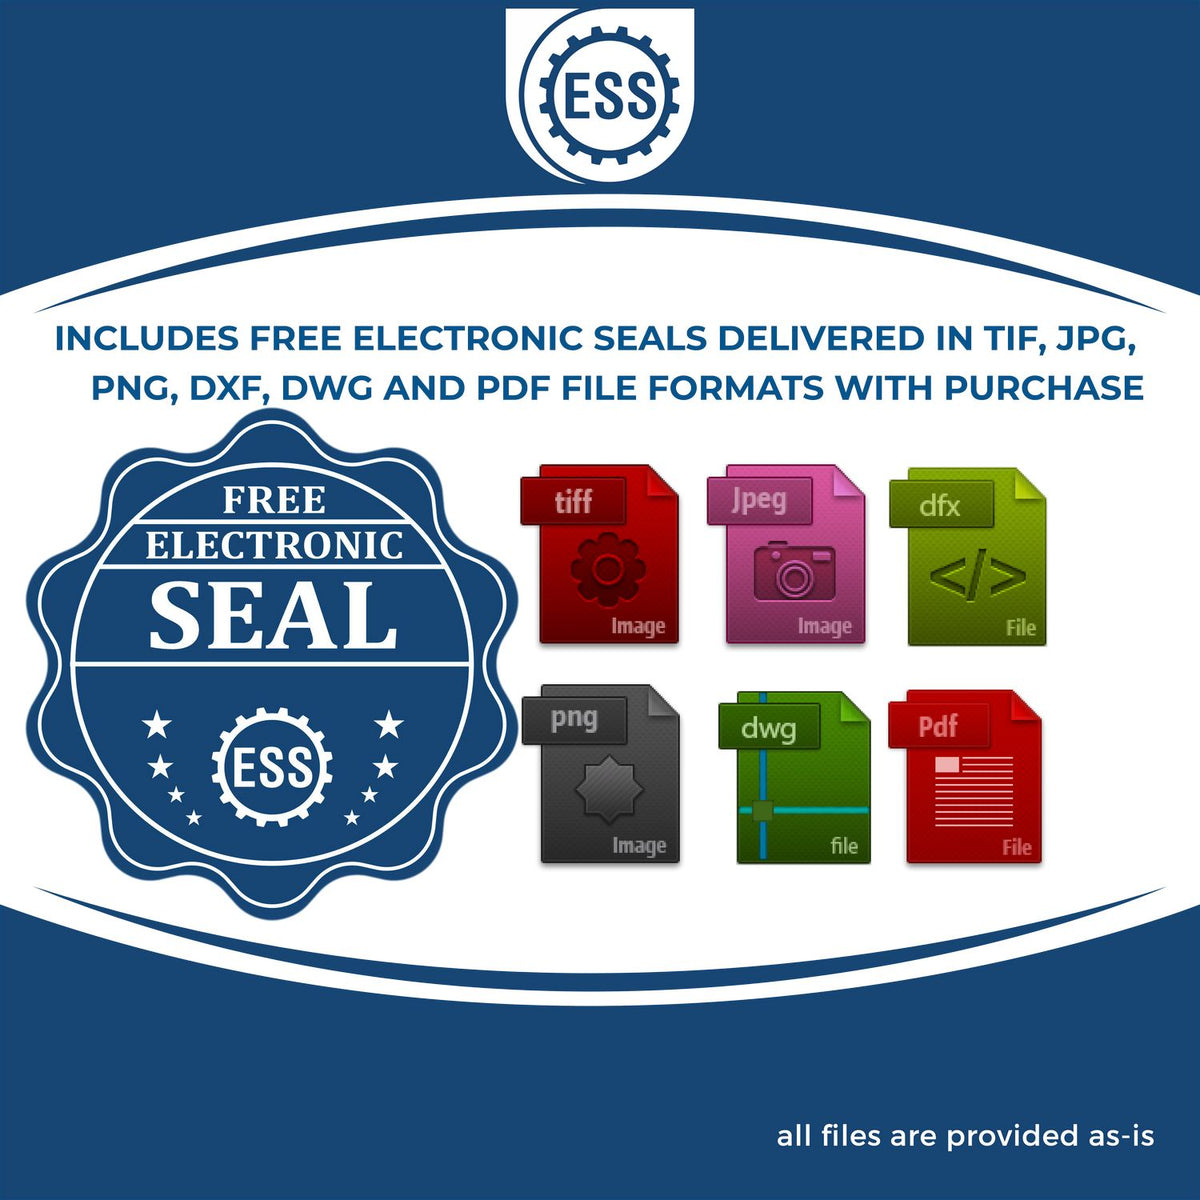 An infographic for the free electronic seal for the Alaska Professional Geologist Seal Stamp illustrating the different file type icons such as DXF, DWG, TIF, JPG and PNG.